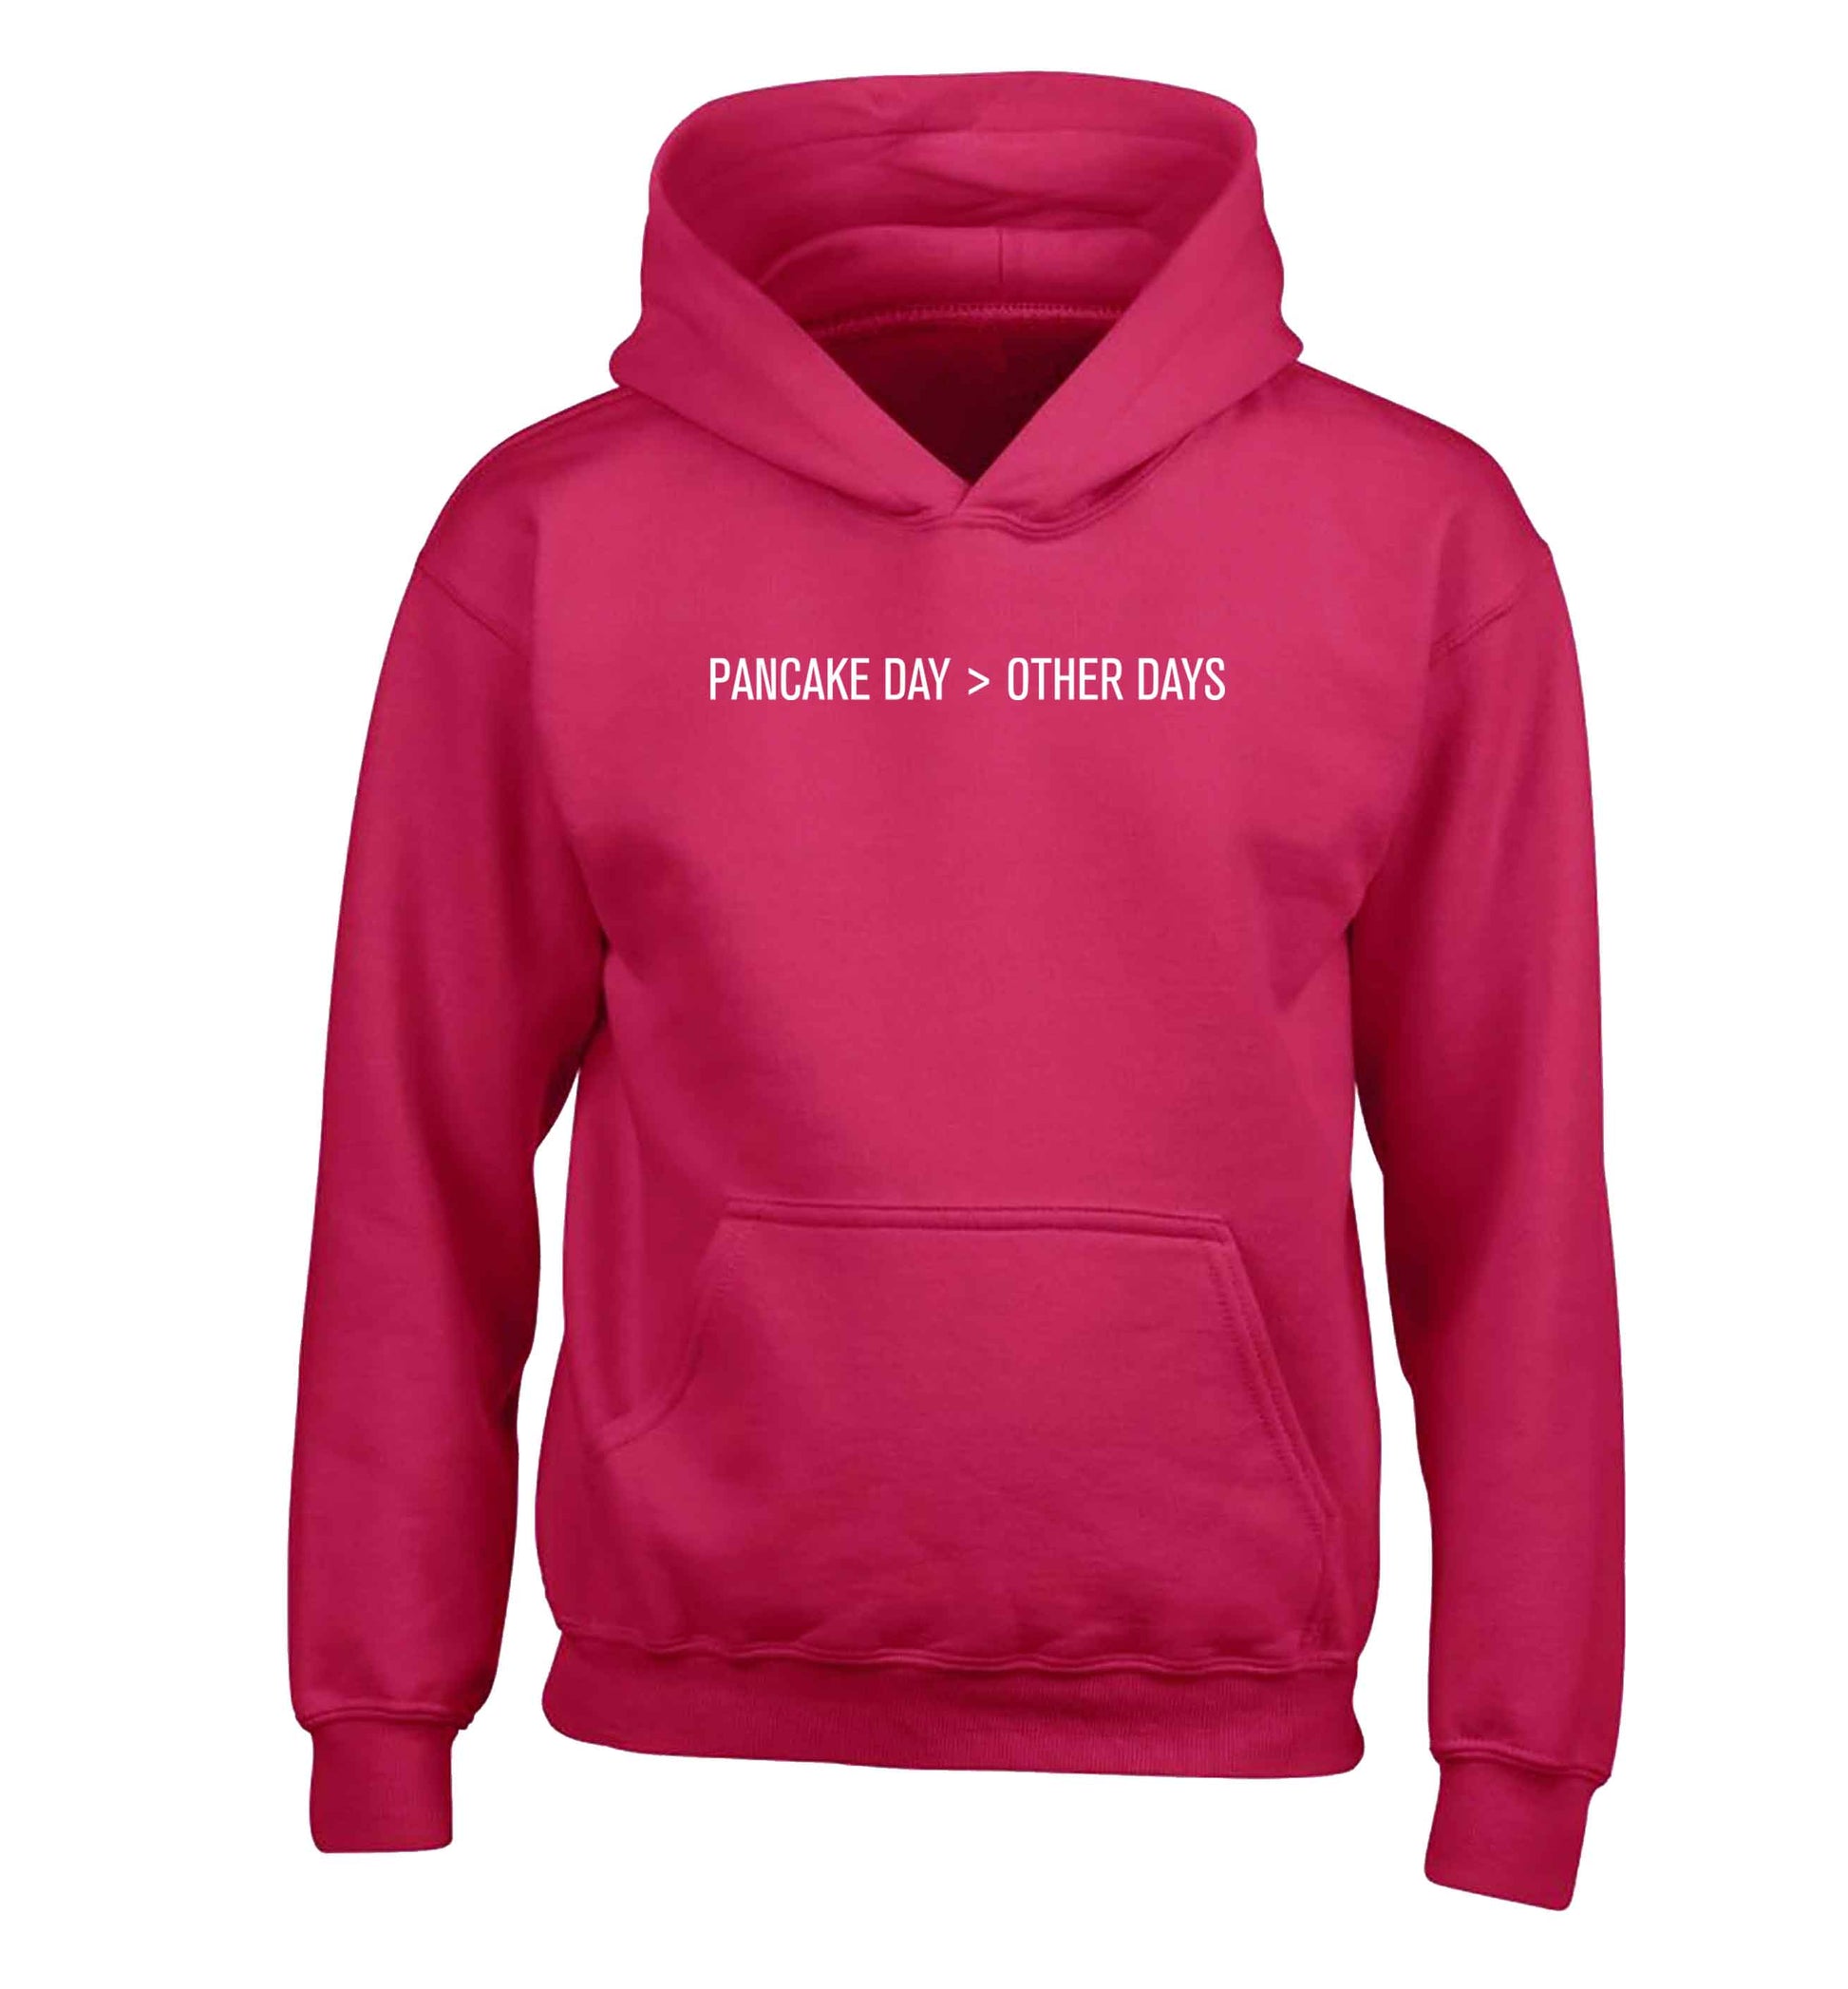 Pancake day > other days children's pink hoodie 12-13 Years